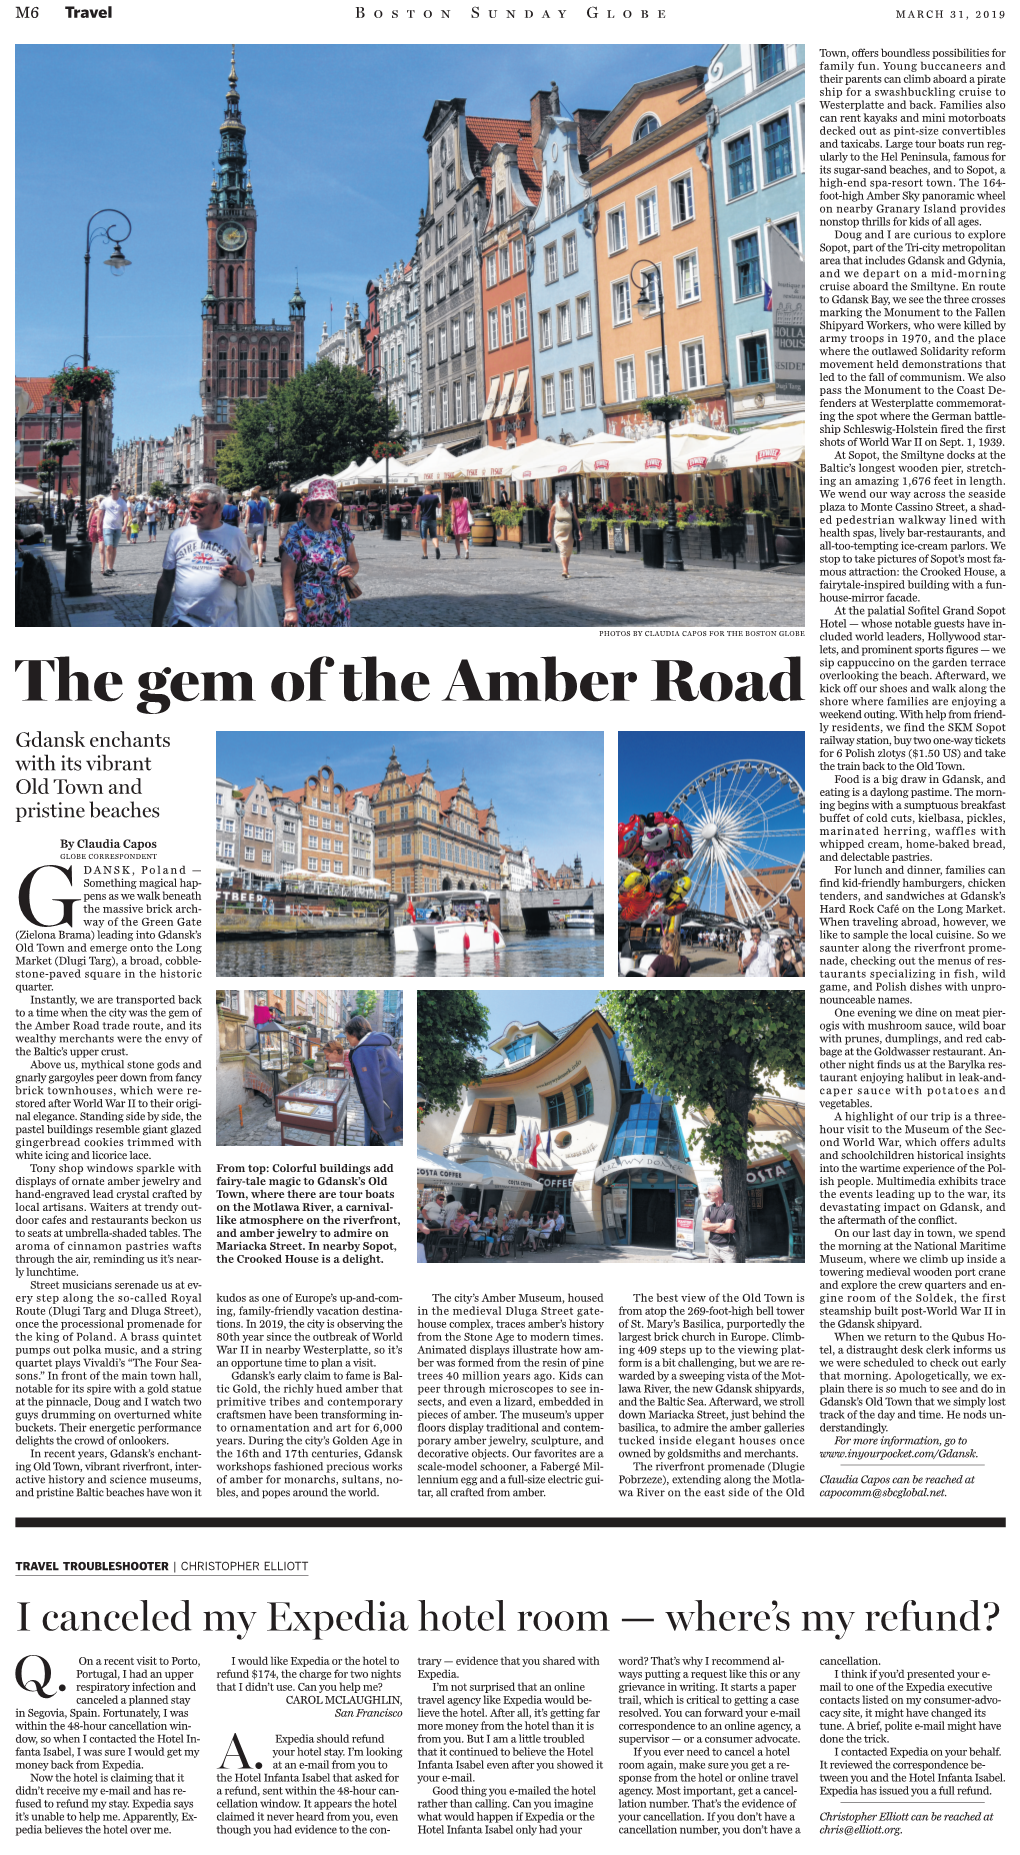 The Gem of the Amber Road Shore Where Families Are Enjoying a Weekend Outing